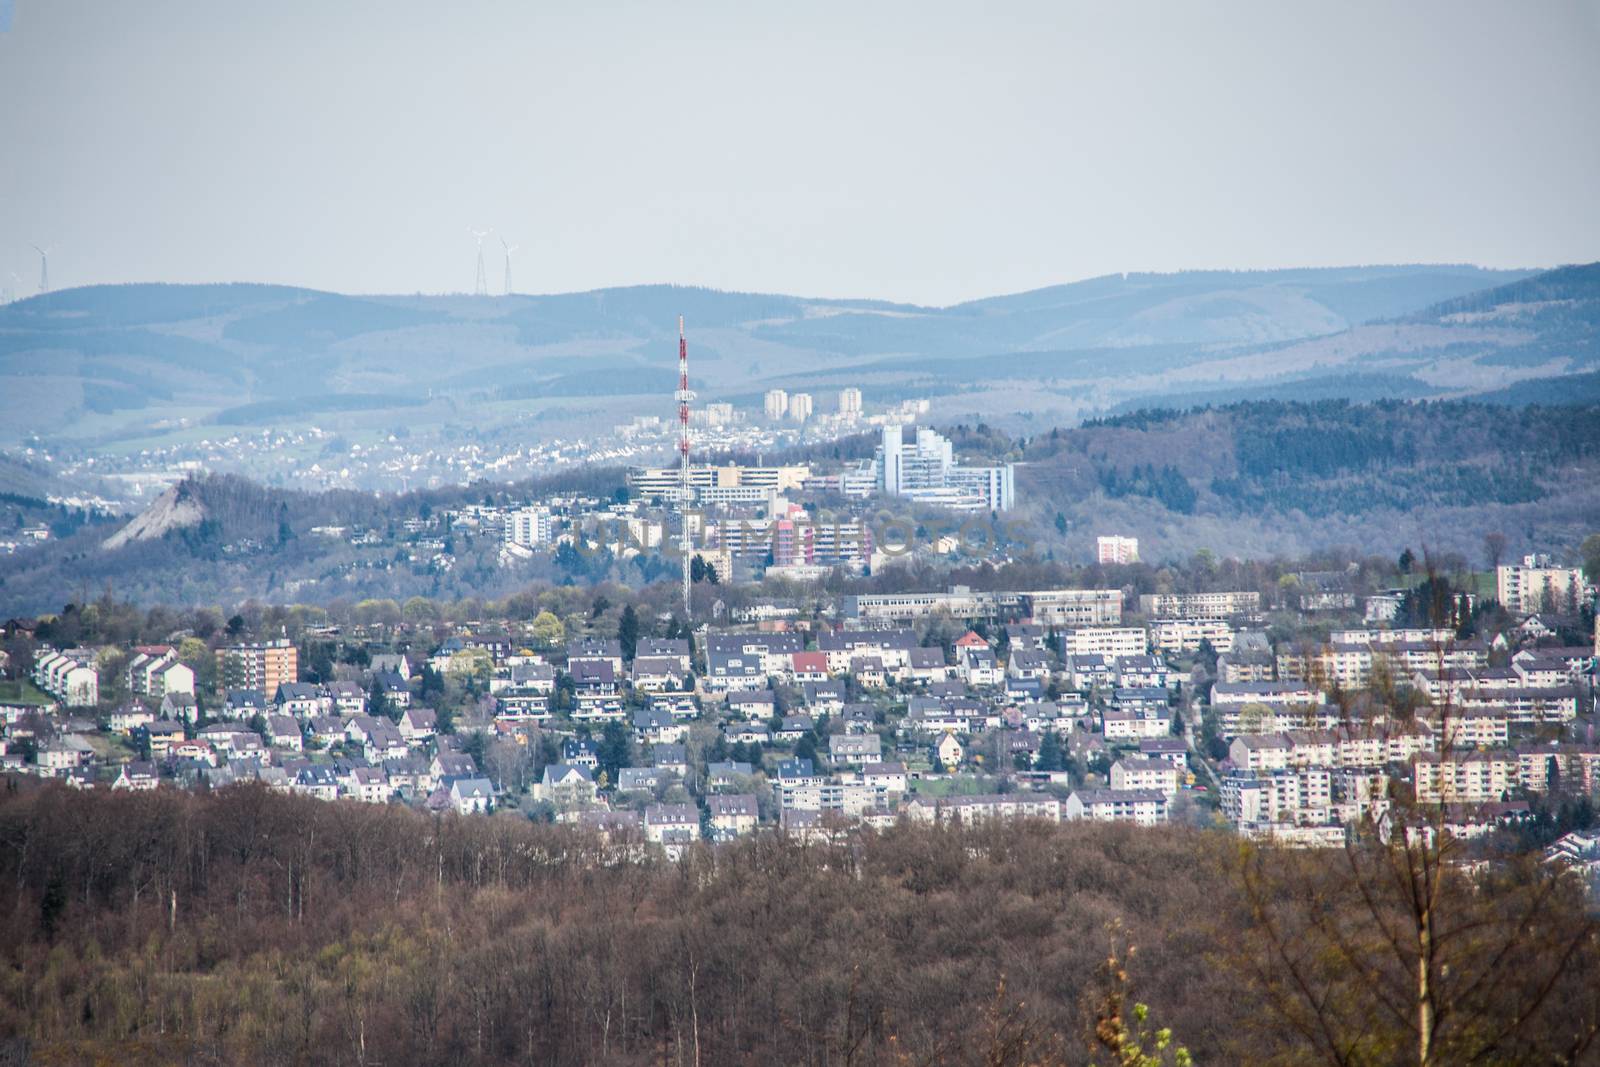 City of Siegen with university from the mountain top by Dr-Lange